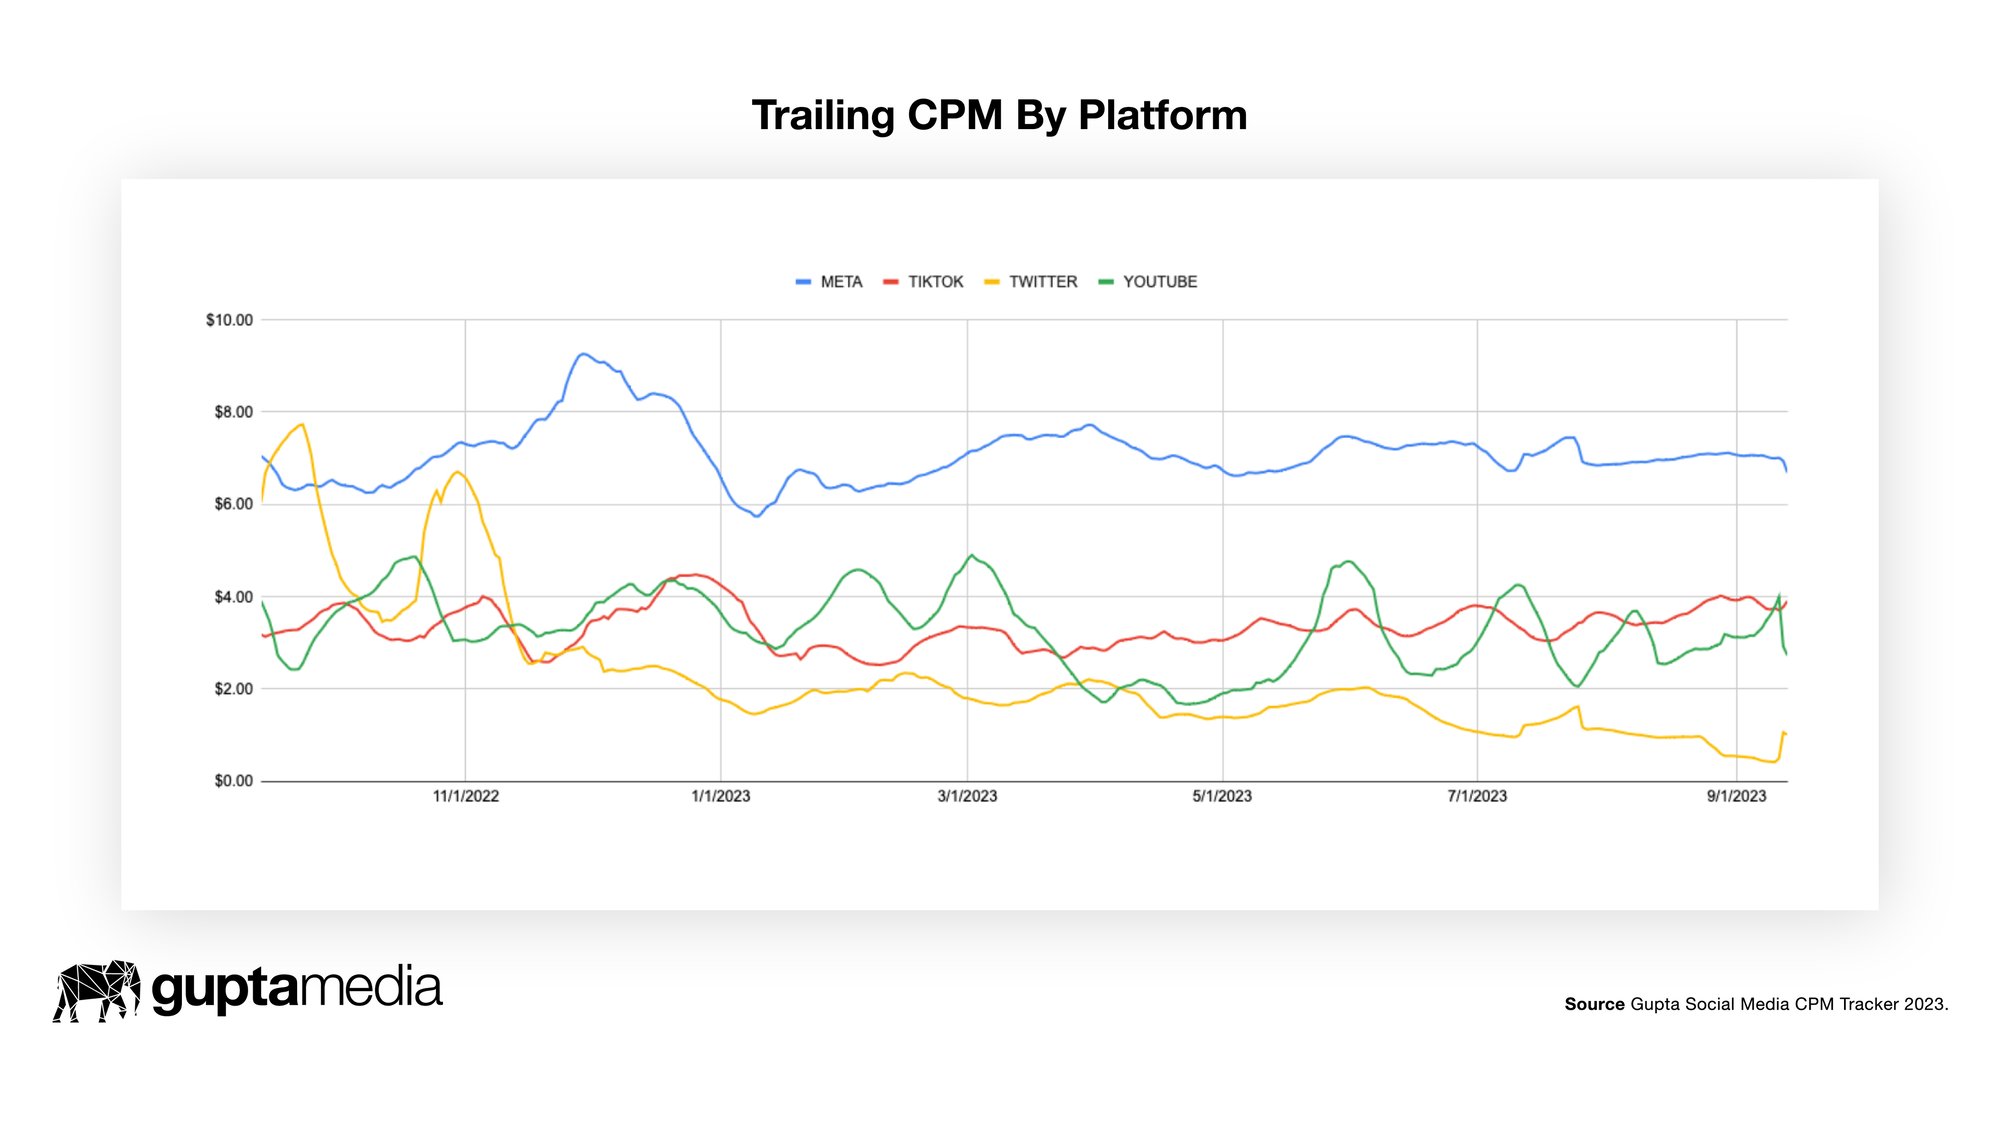 How much is the average CPM of ? What about for various